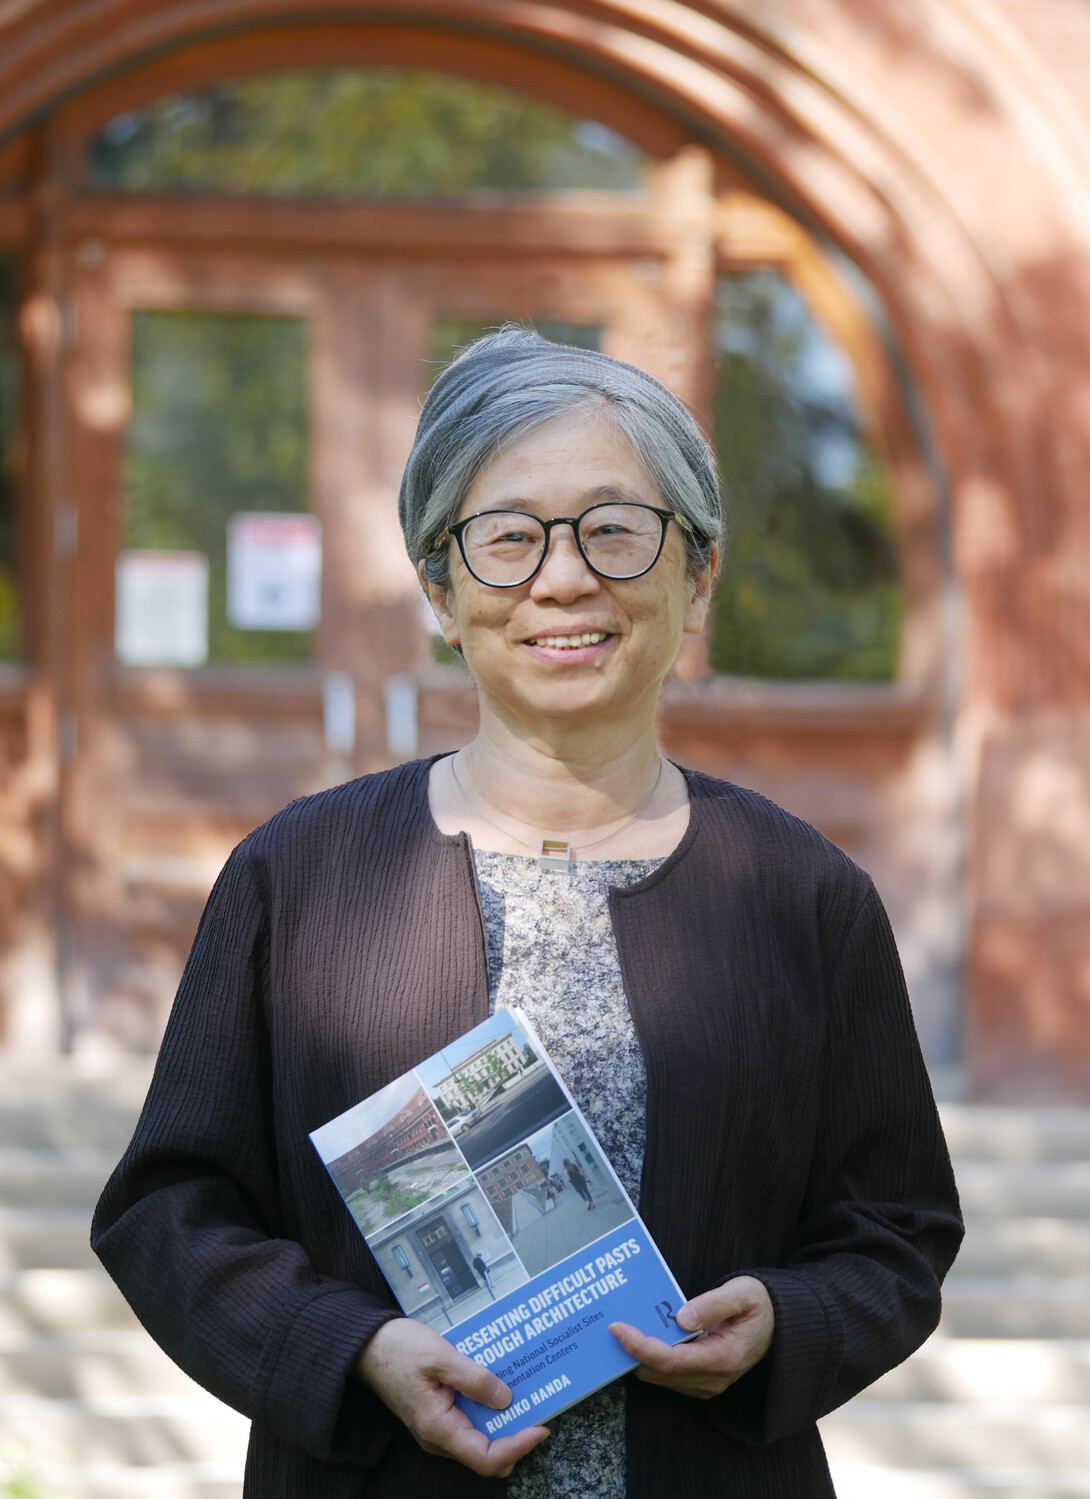 Rumiko Handa poses with her new book "Presenting Difficult Pasts Through Architecture: Converting National Socialist Sites to Documentation Centers"